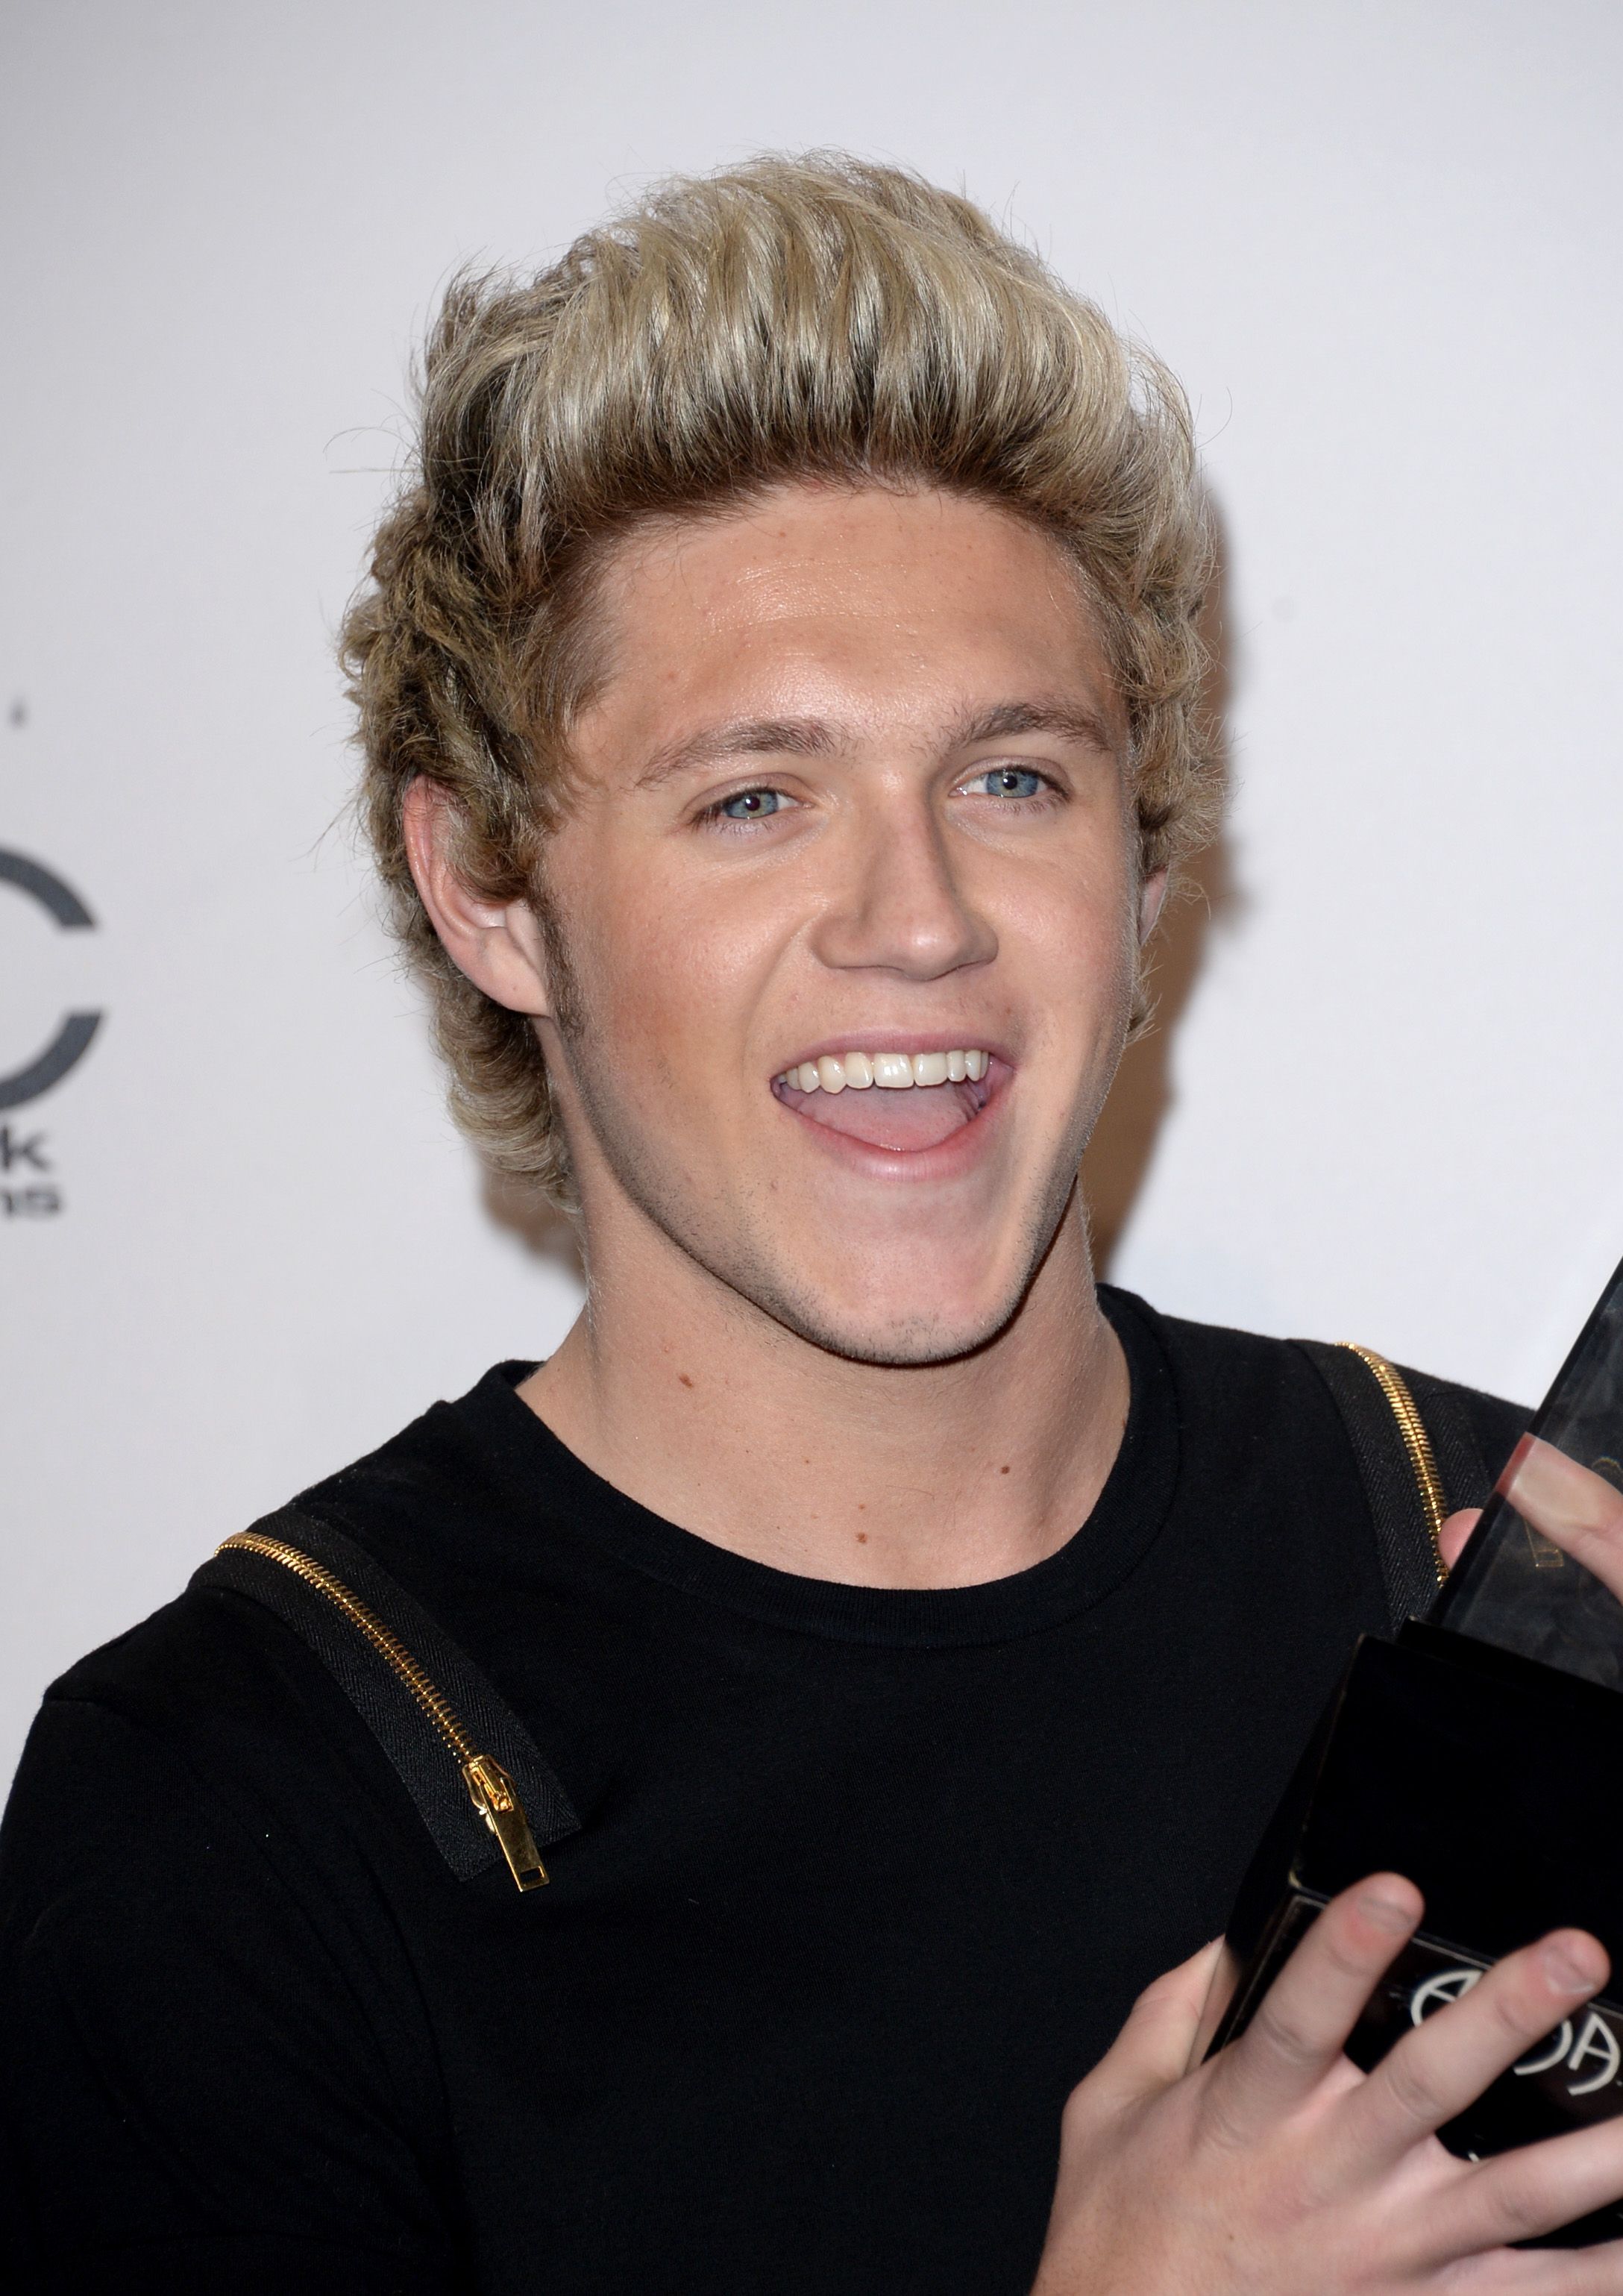 Niall Horan: Short Swept Back Quiff Hairstyle | Man For Himself